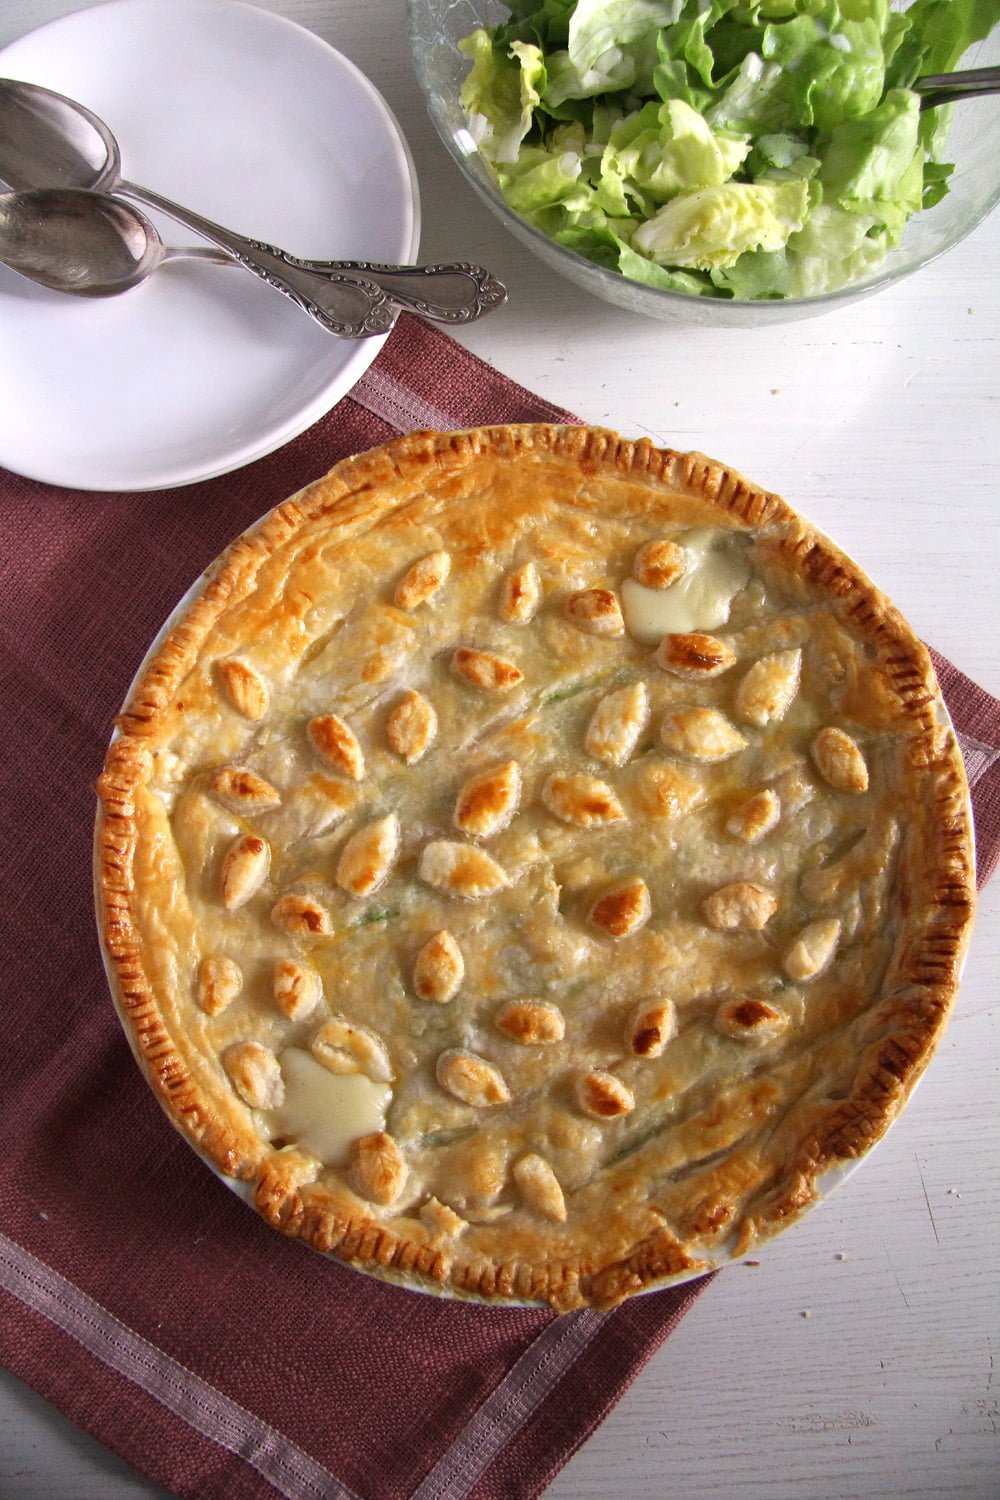 Chicken and Ham Pie with green salad